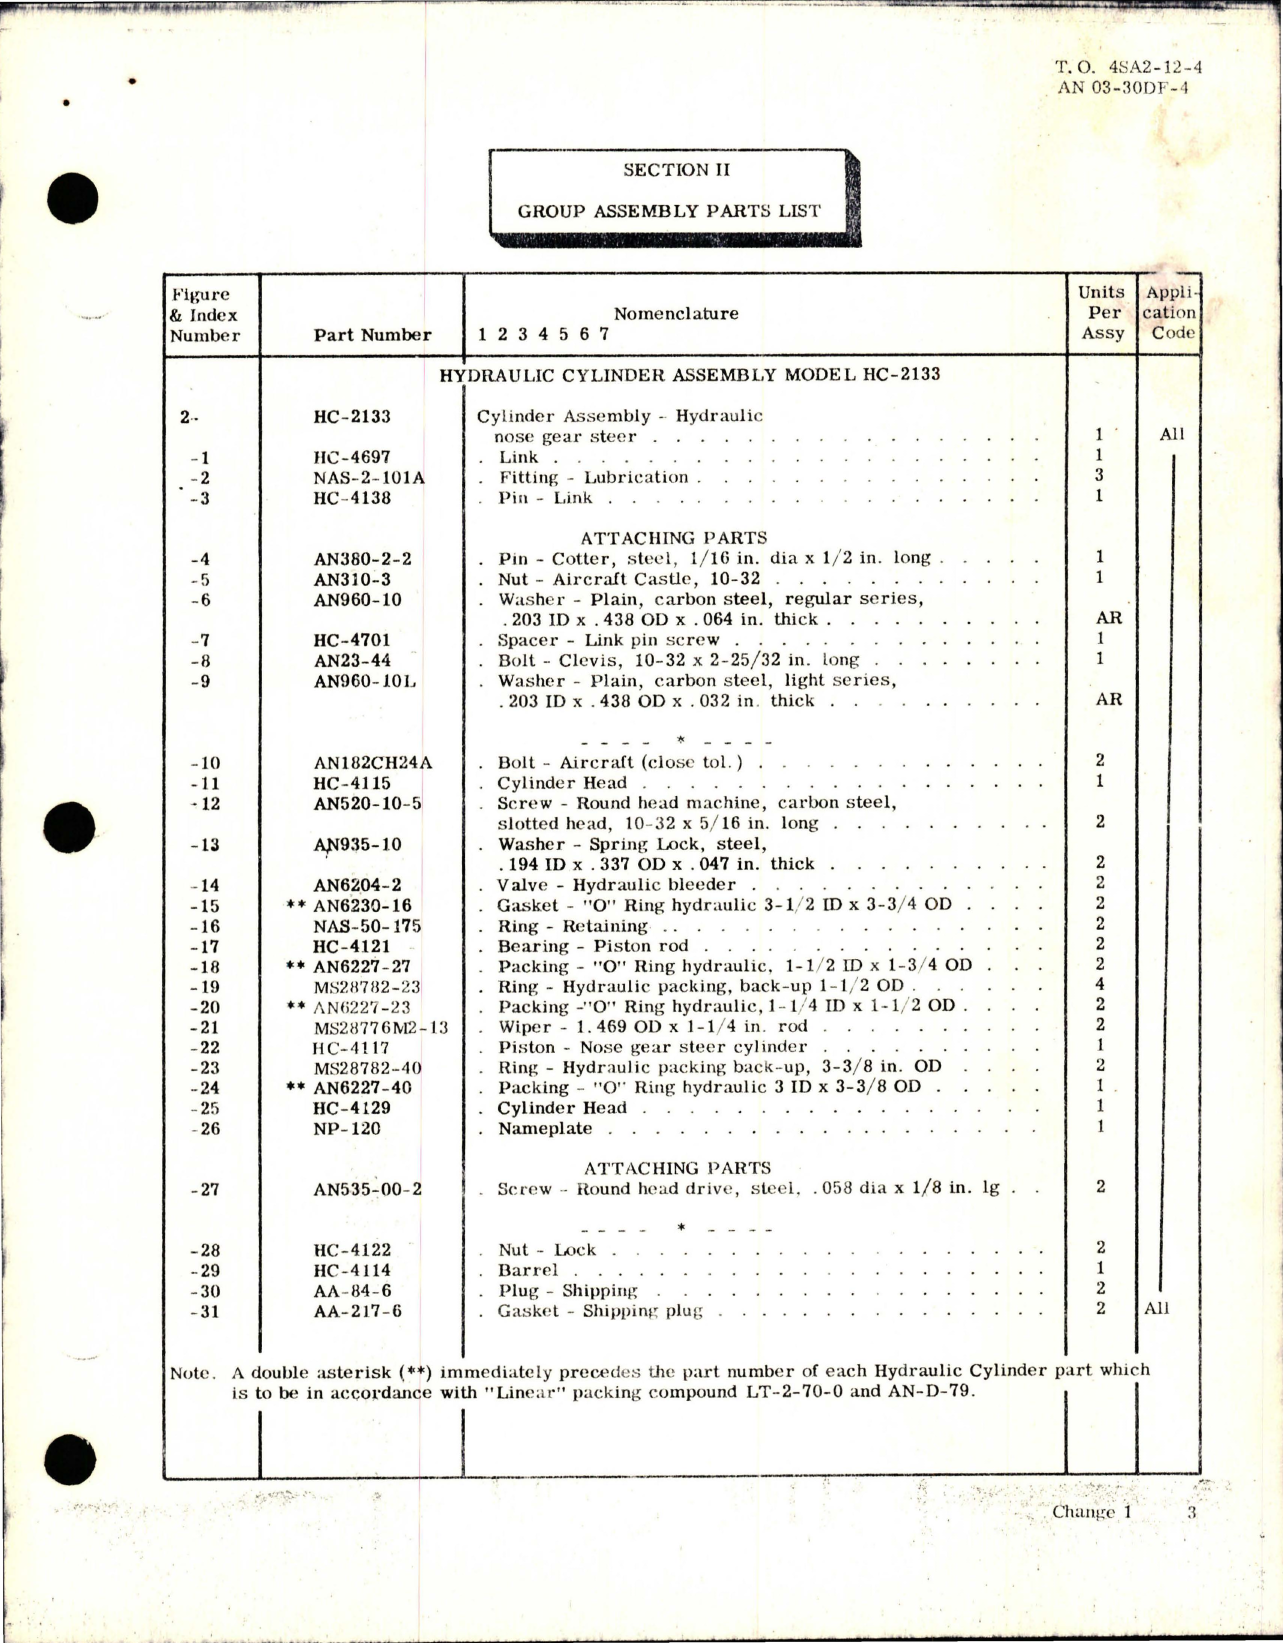 Sample page 5 from AirCorps Library document: Parts Catalog for Hydraulic Cylinder - Models HC-2133, HC-2133M1, and HC-2133M2